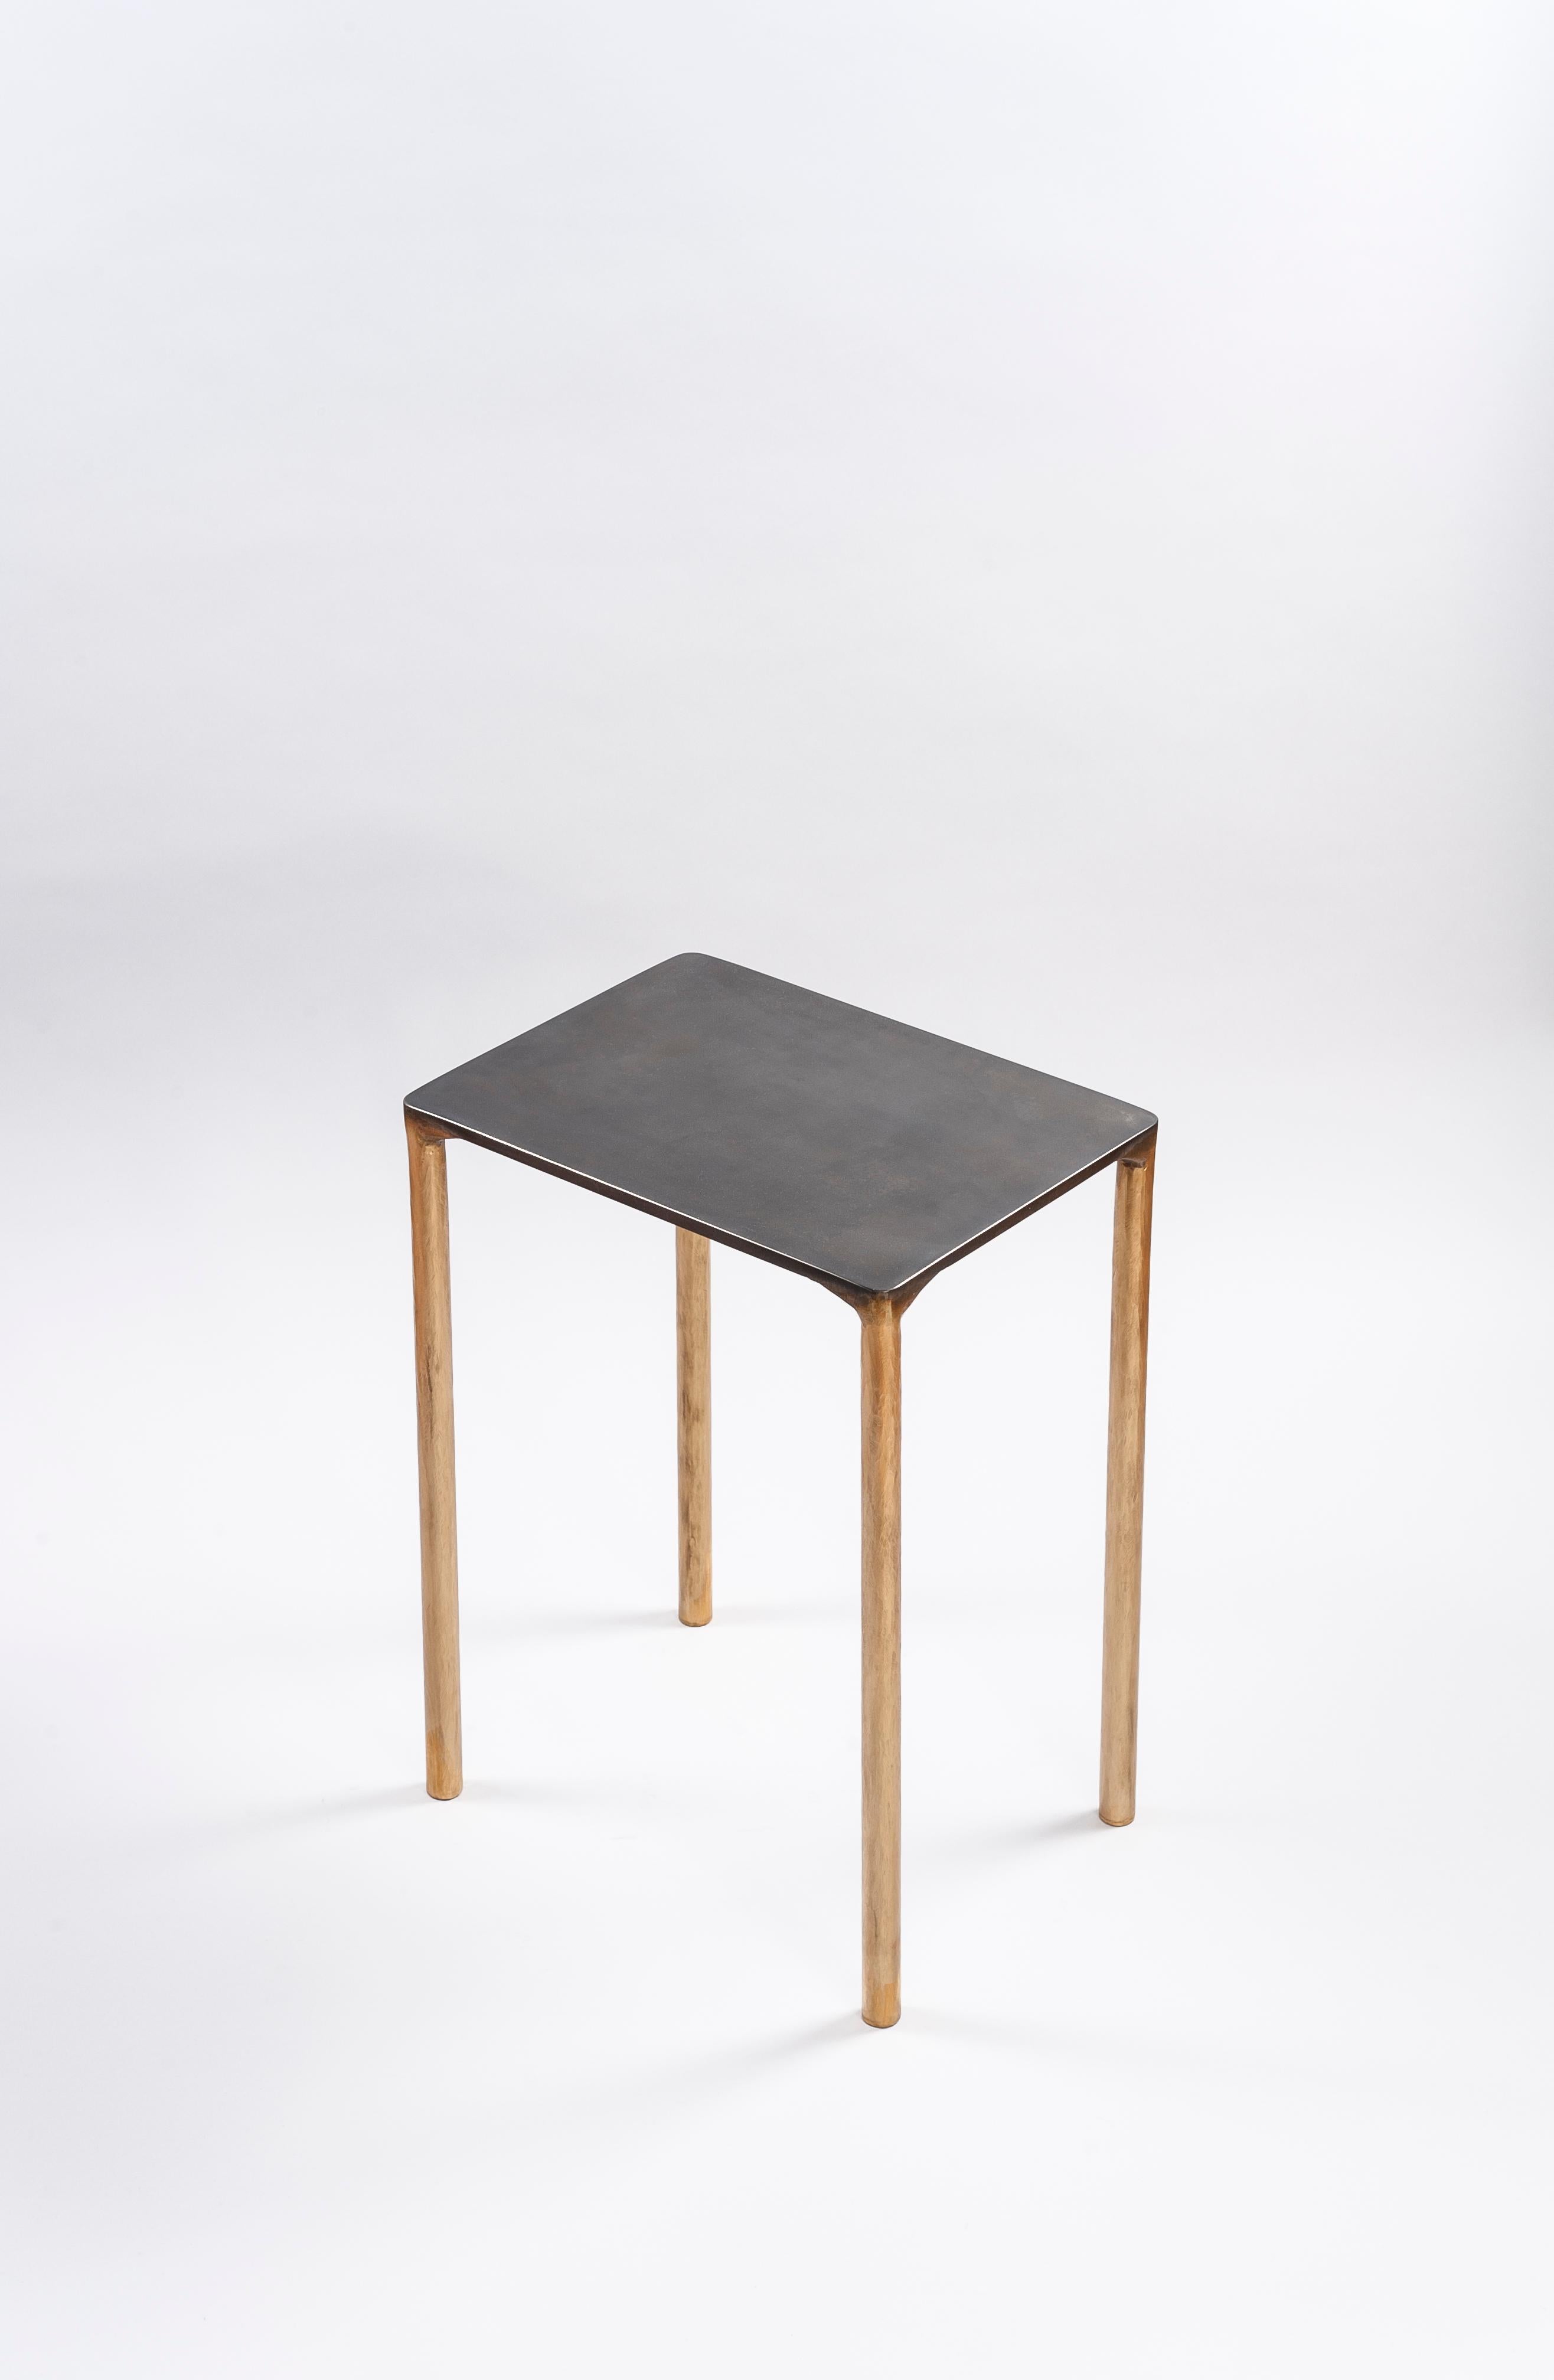 Brass side table signed by Lukasz Friedrich.
Materials: Solid Brass and Stainless steel.
Brass legs gently textured and patinated
Stainless top with special treatment and grey patina.
Dimensions: D 28 cm, L 38 cm, H 50 cm.
Signed and